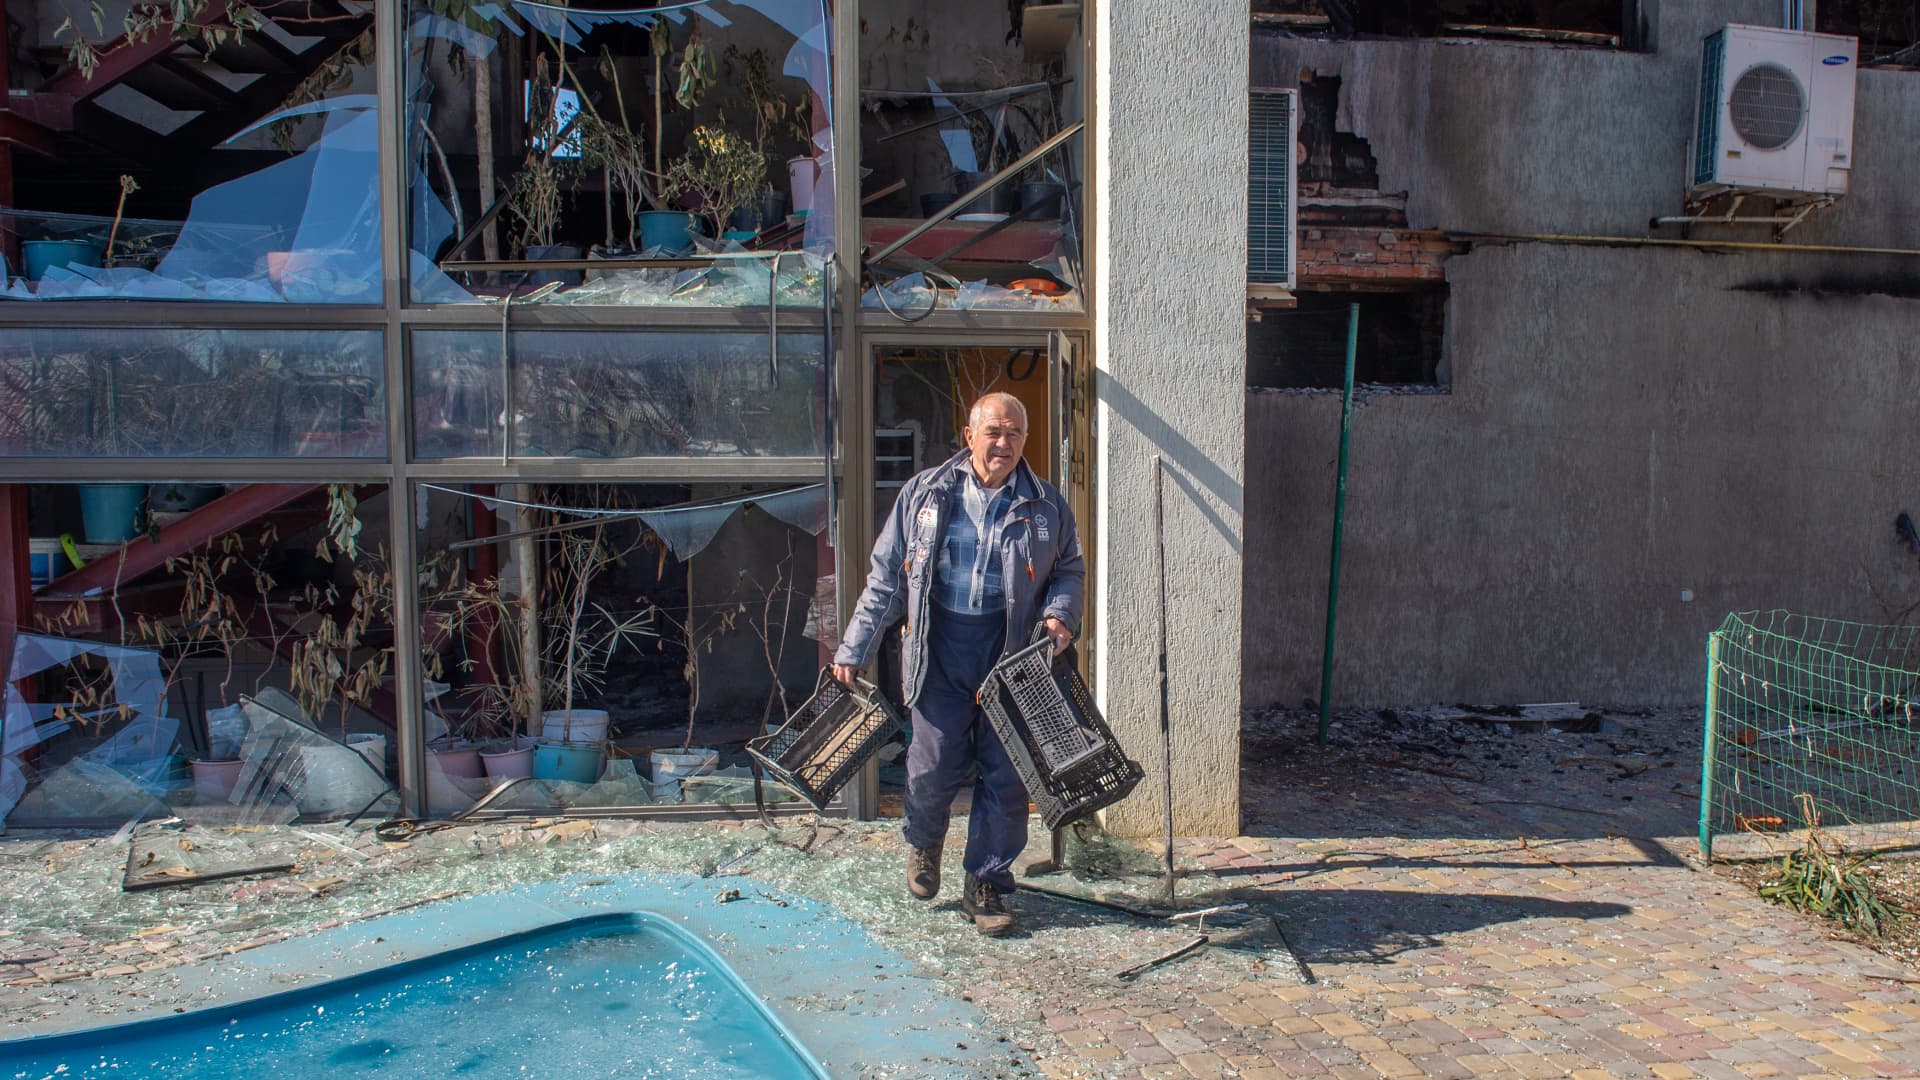 A man leaves with a few belongings from a building damaged after a Russian rocket fire in the cottage district of Kharkiv, Ukraine on March 20, 2022.